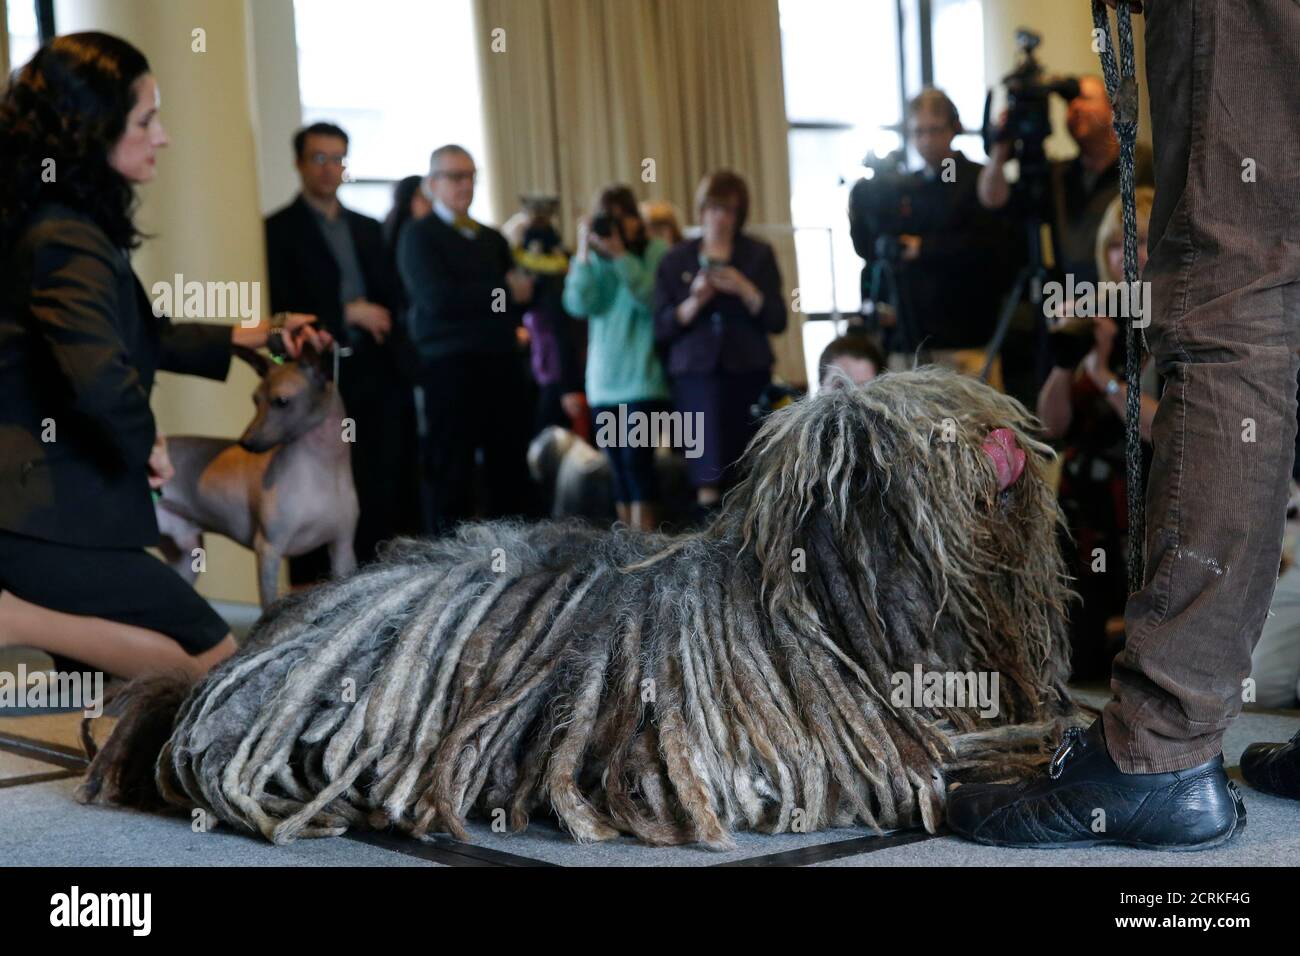 Bergamasco Sheepdog High Resolution Stock Photography and Images - Alamy